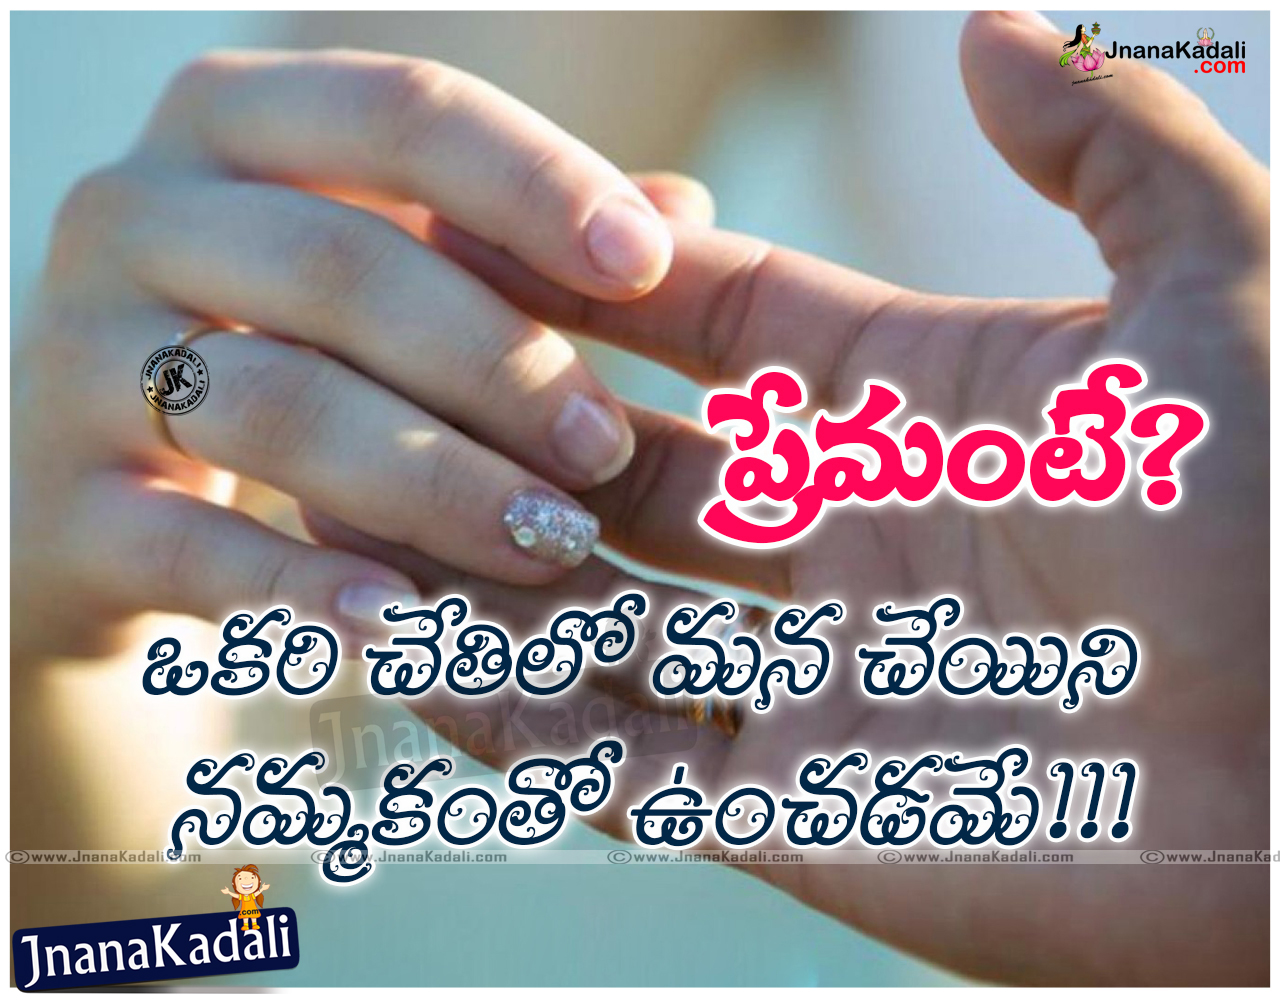 Here is a Best Collection of True Telugu Love Quotes and Poetry Inspiring Telugu Love Quotations Beautiful Love Poems with Nice